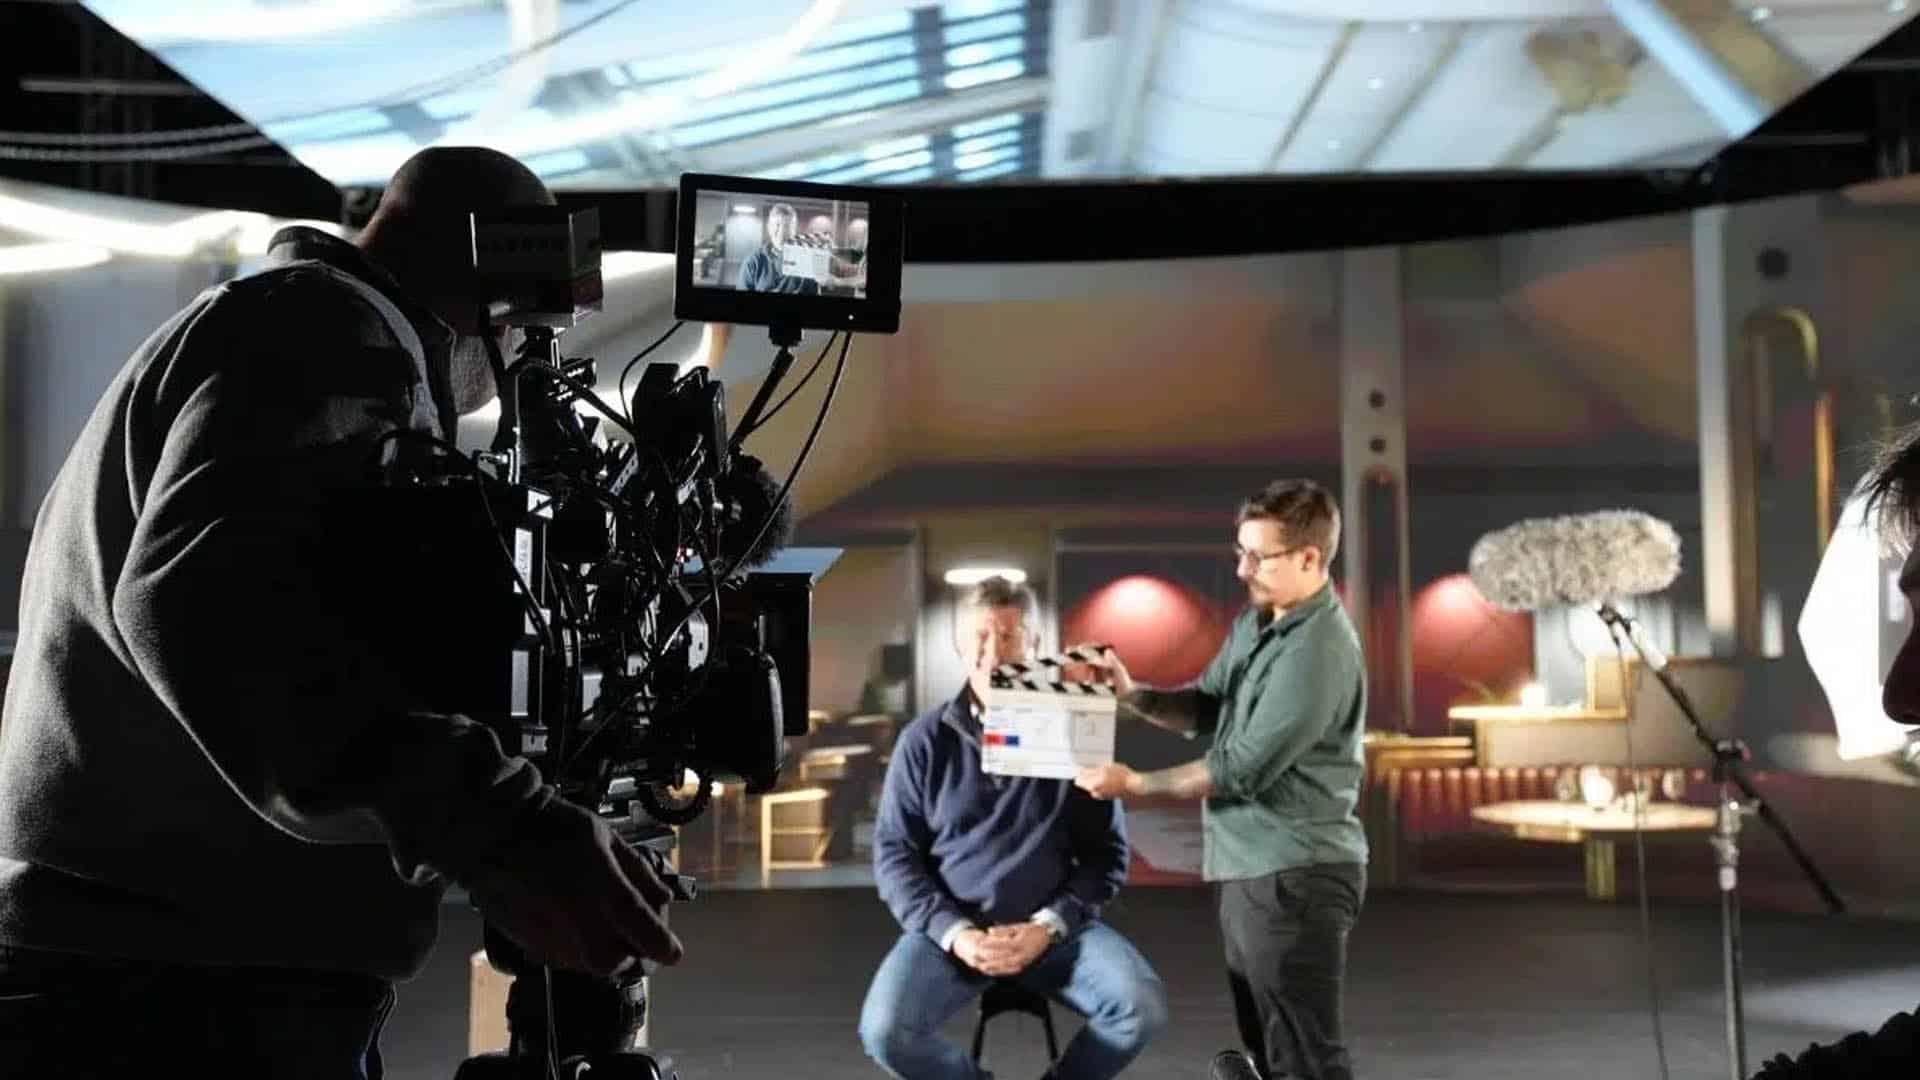 LED virtual production experience you can trust